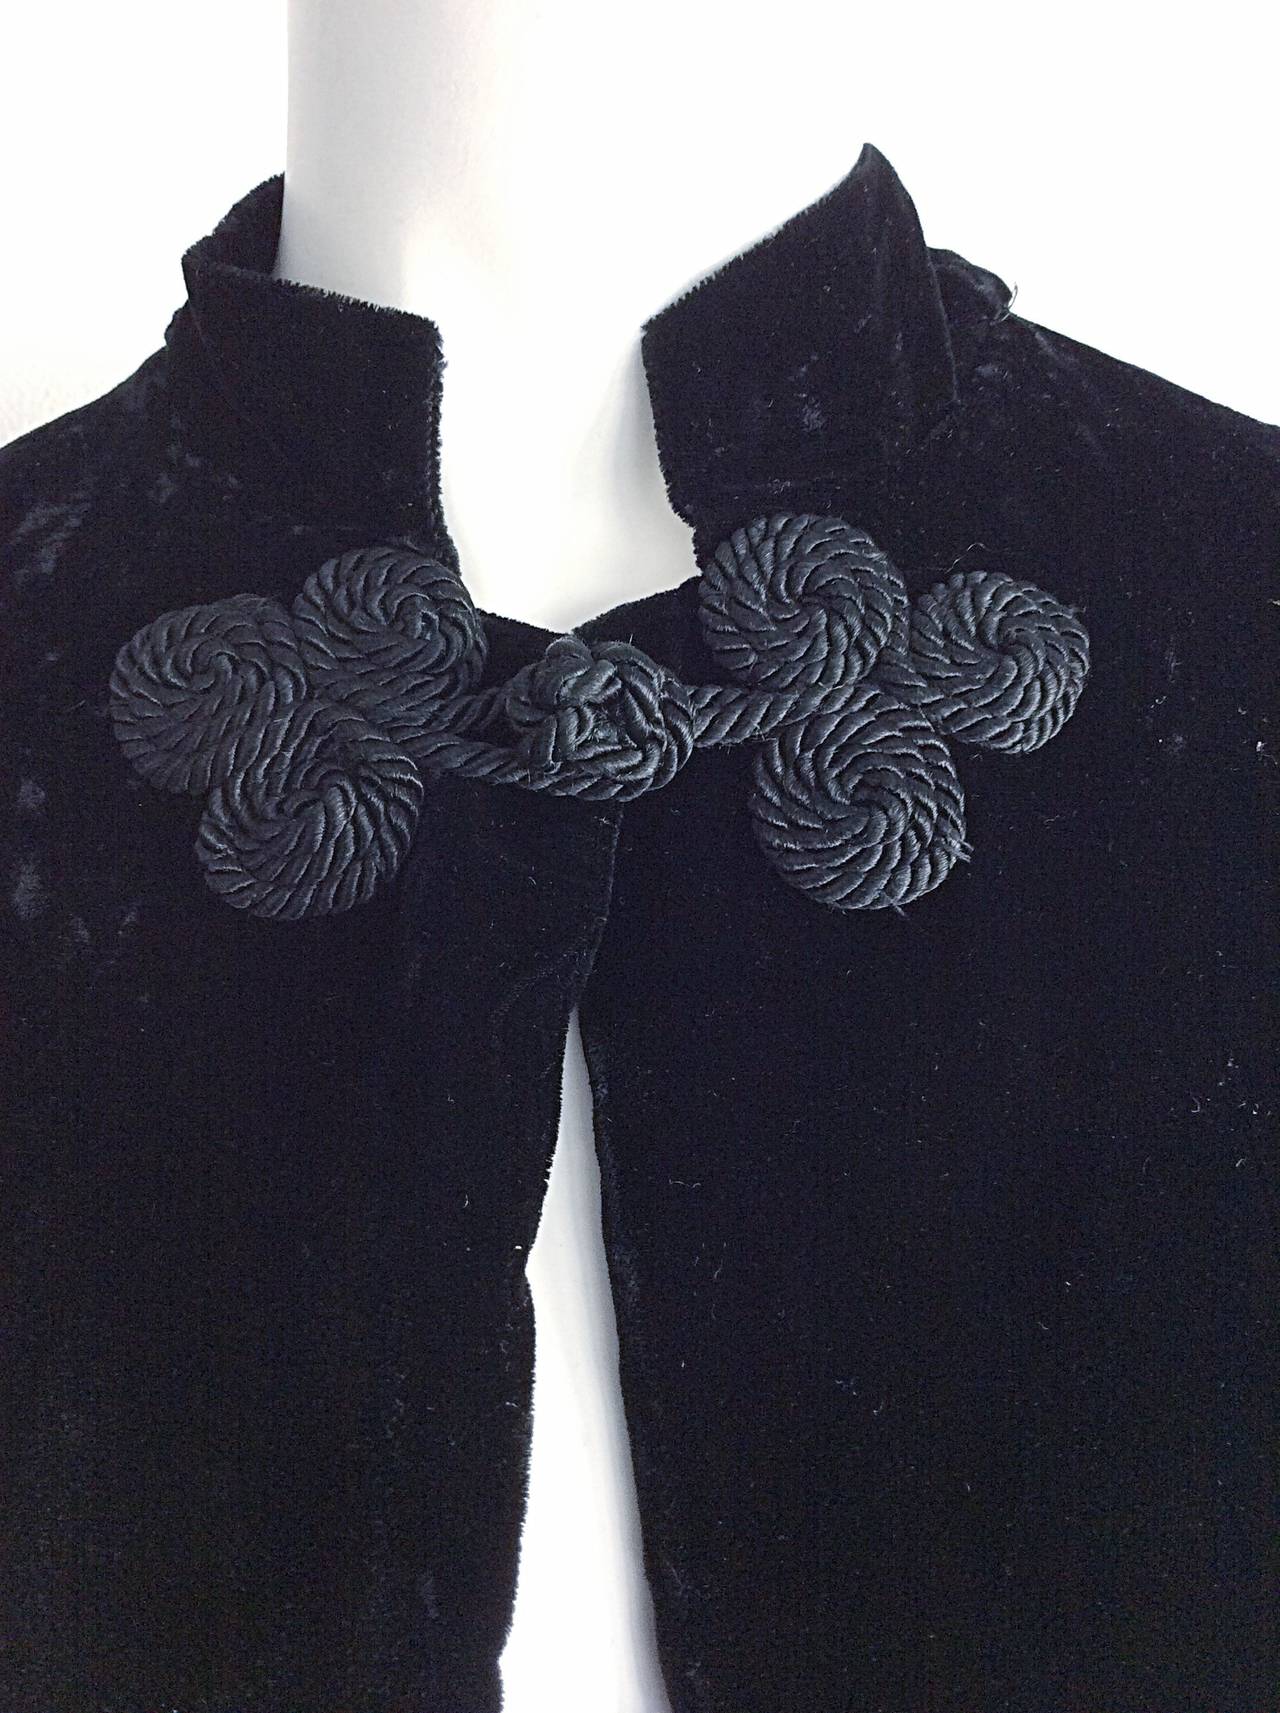 Incredible 1950s Ceil Chapman black velvet cloak! Lined with impossible to find milium fabric, which keeps the body extremely warm in even the coldest of climates! Intricate silk corded braided detail at neck closure. Attached weighted black velvet